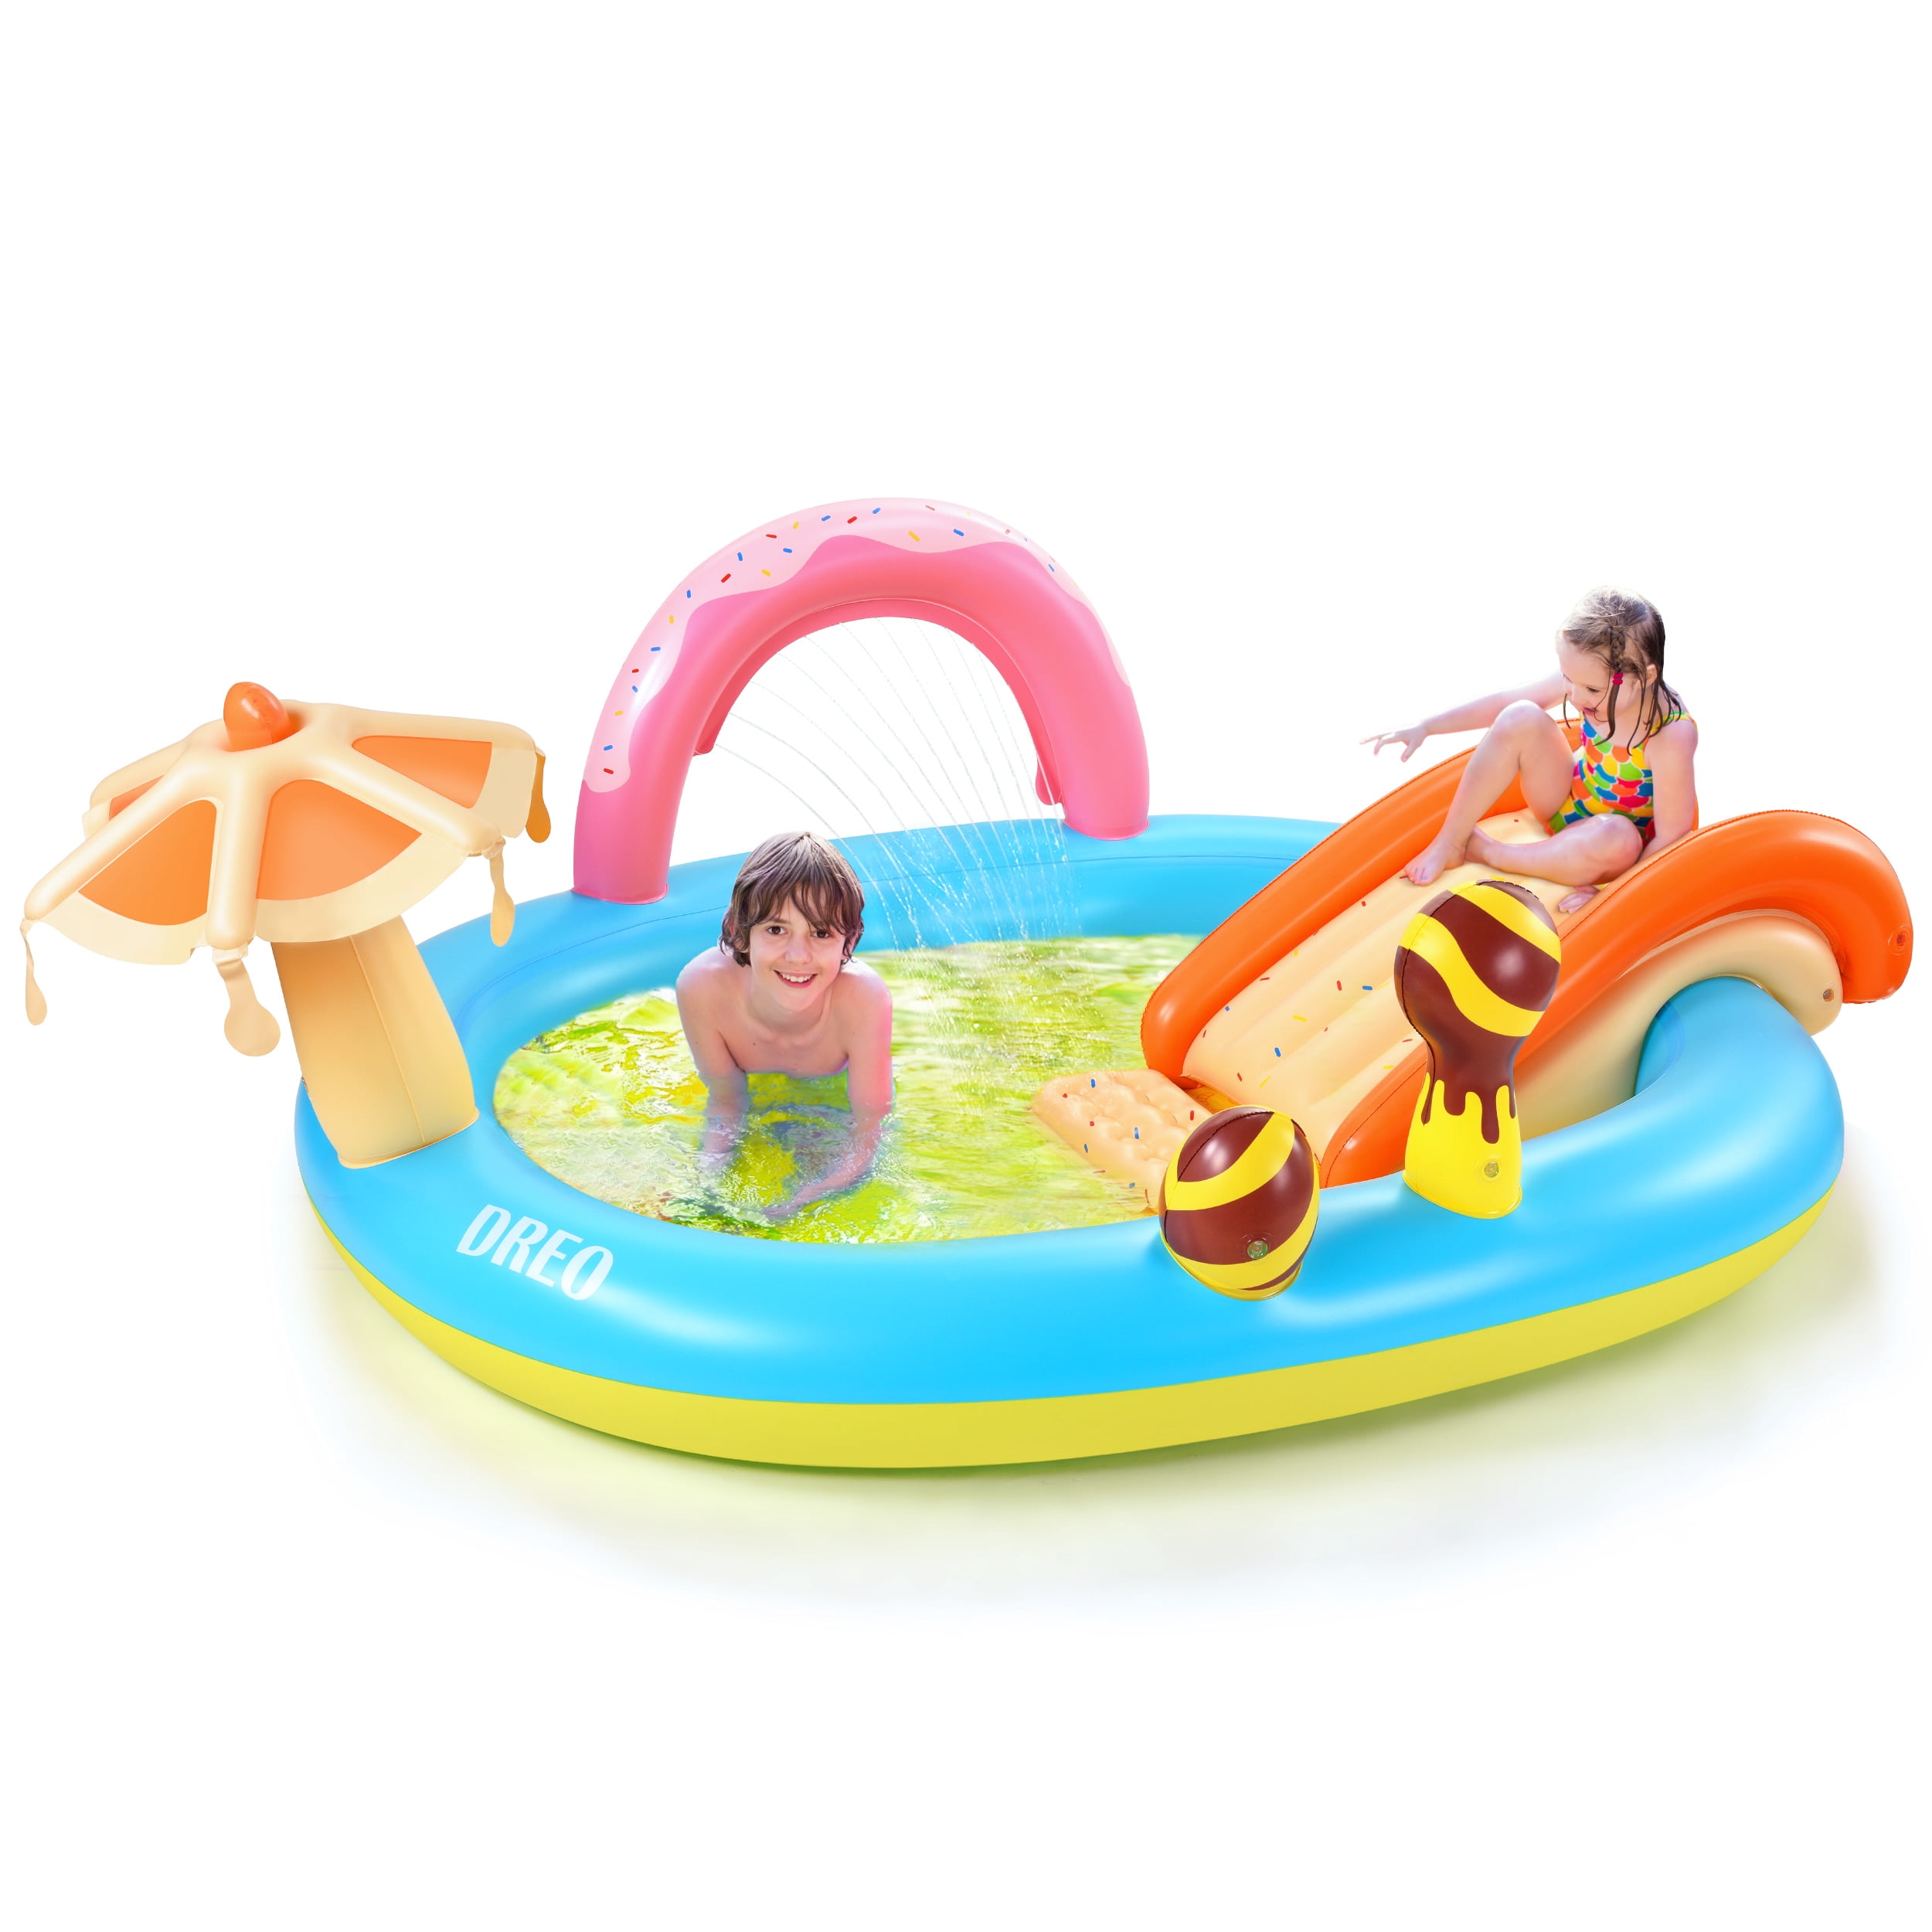 Inflatable Play Center Hesung Full-sized Kiddie Pool Slide Fountain Arch USA for sale online 